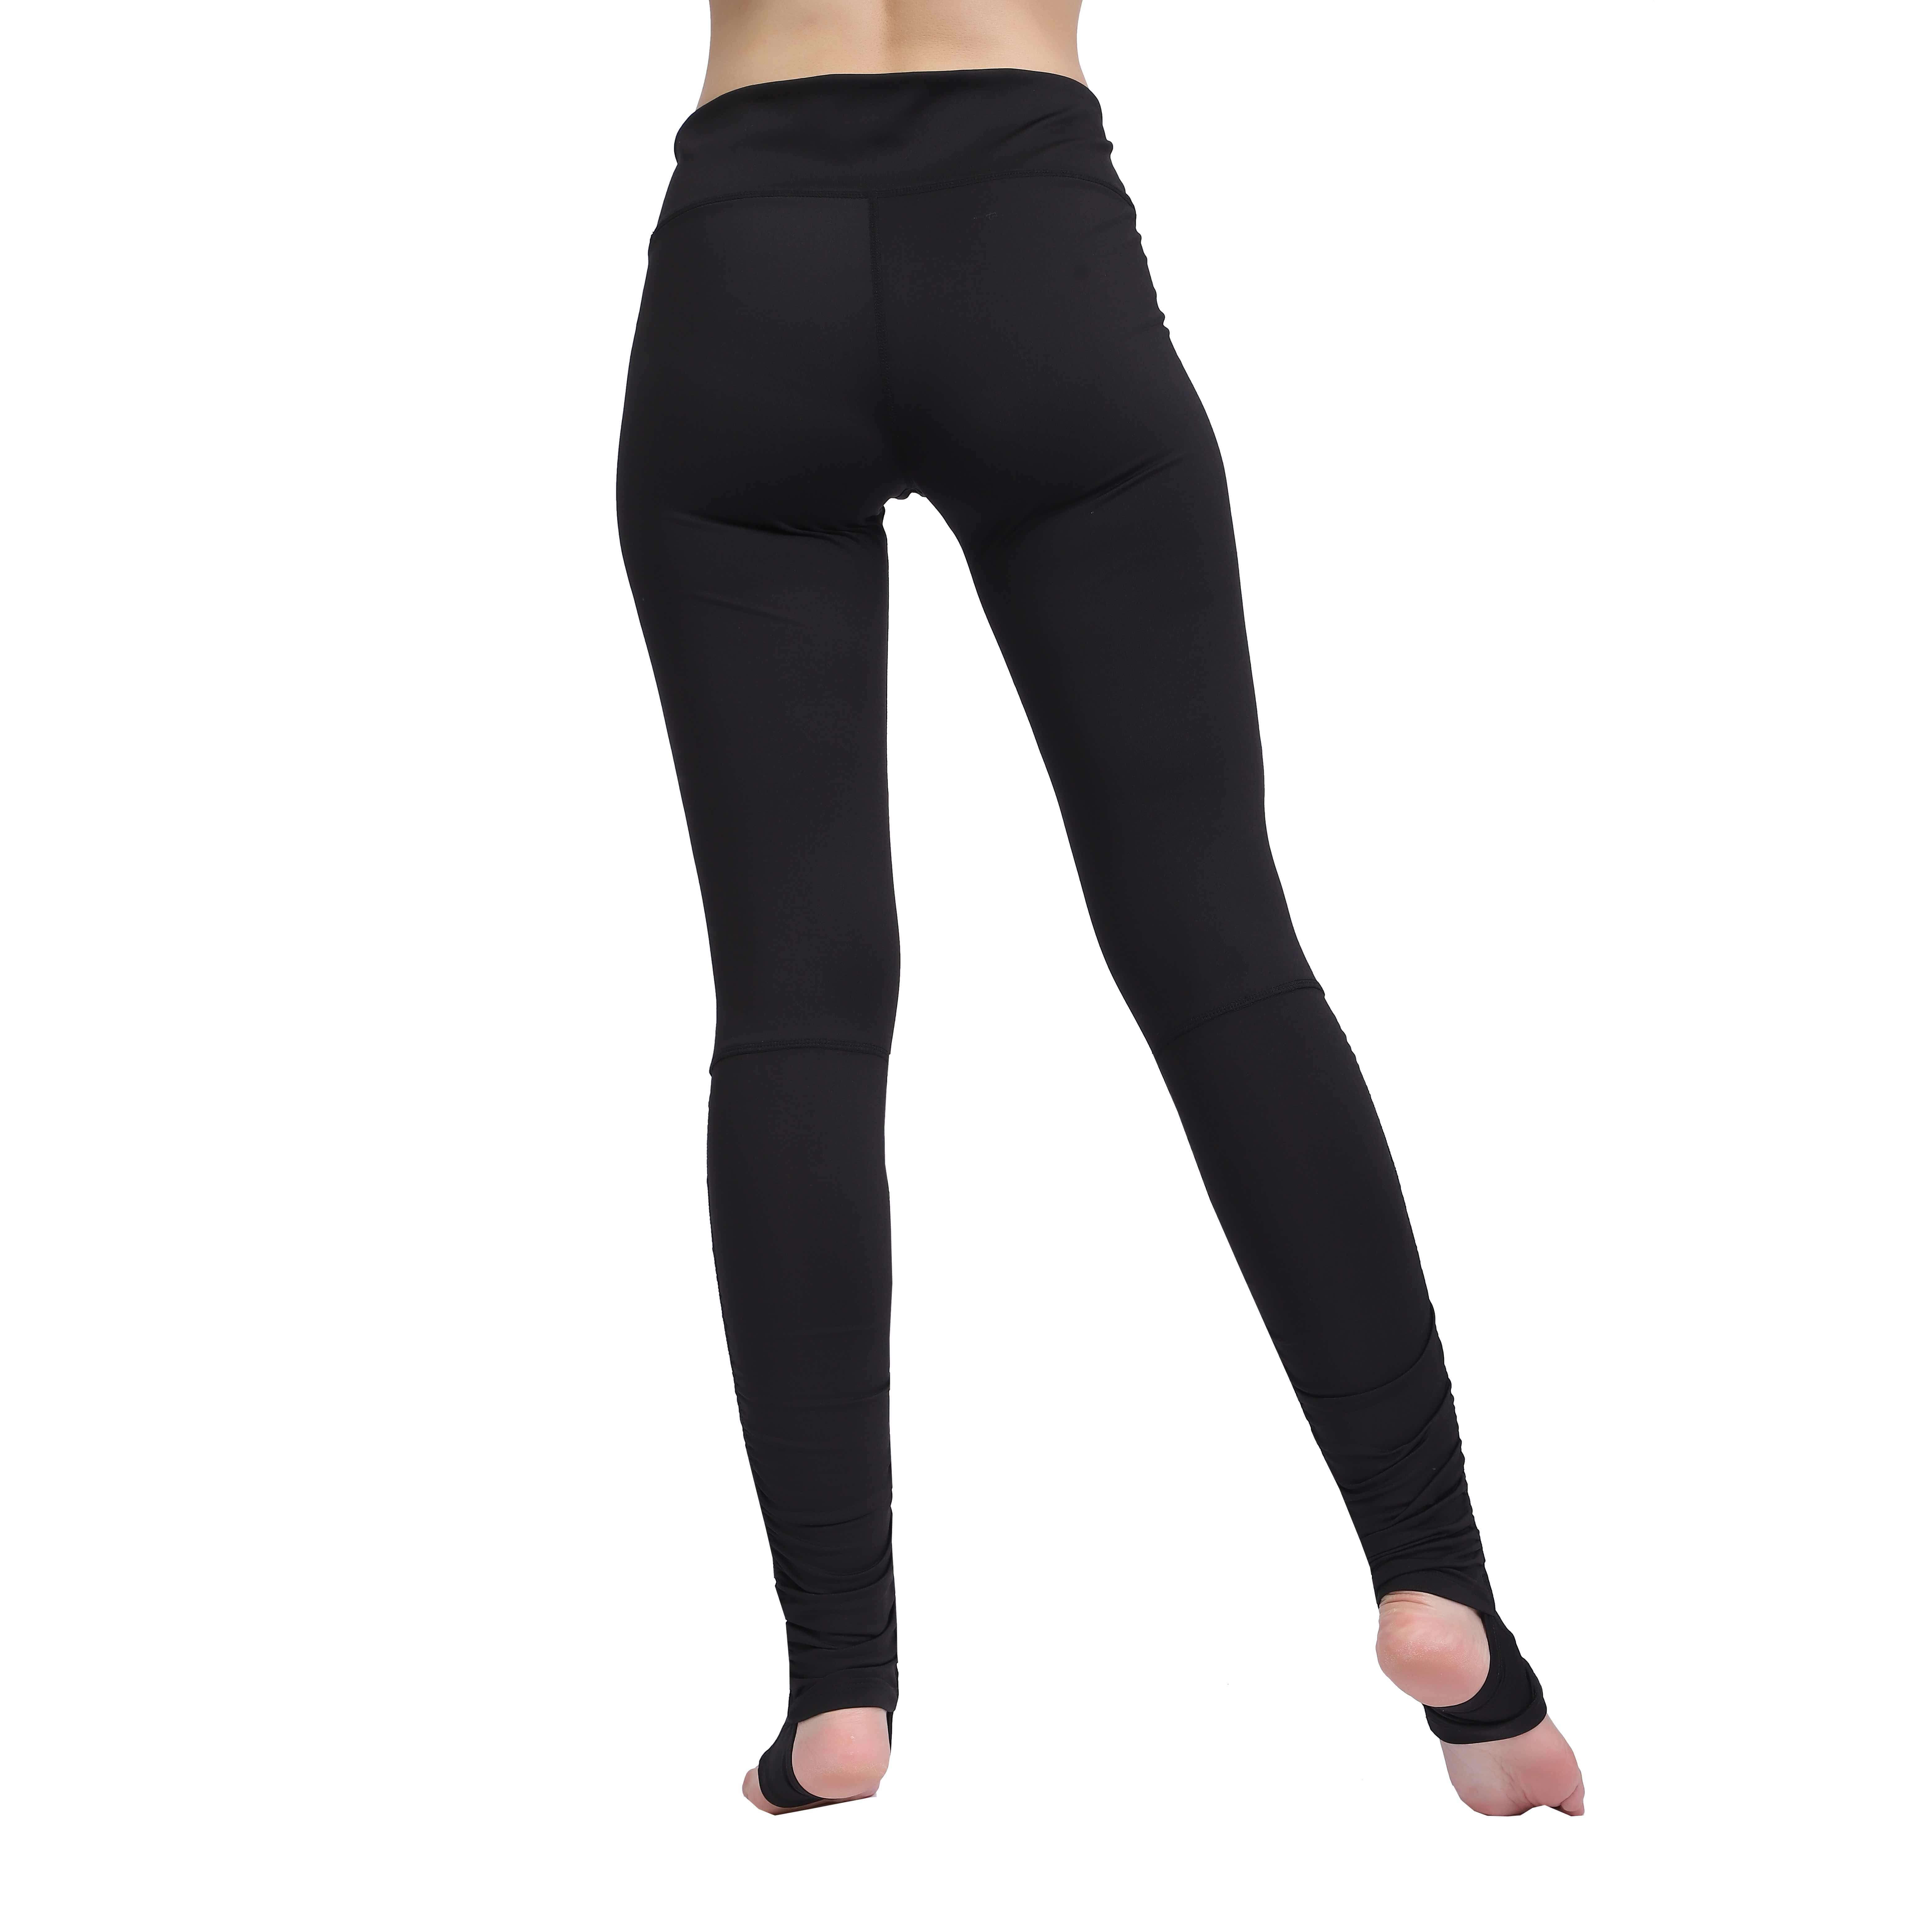 Women's Long Yoga Pants Sports Leggings With Crotch Gusset Running Tights High Waist Stretch Fitness Trousers